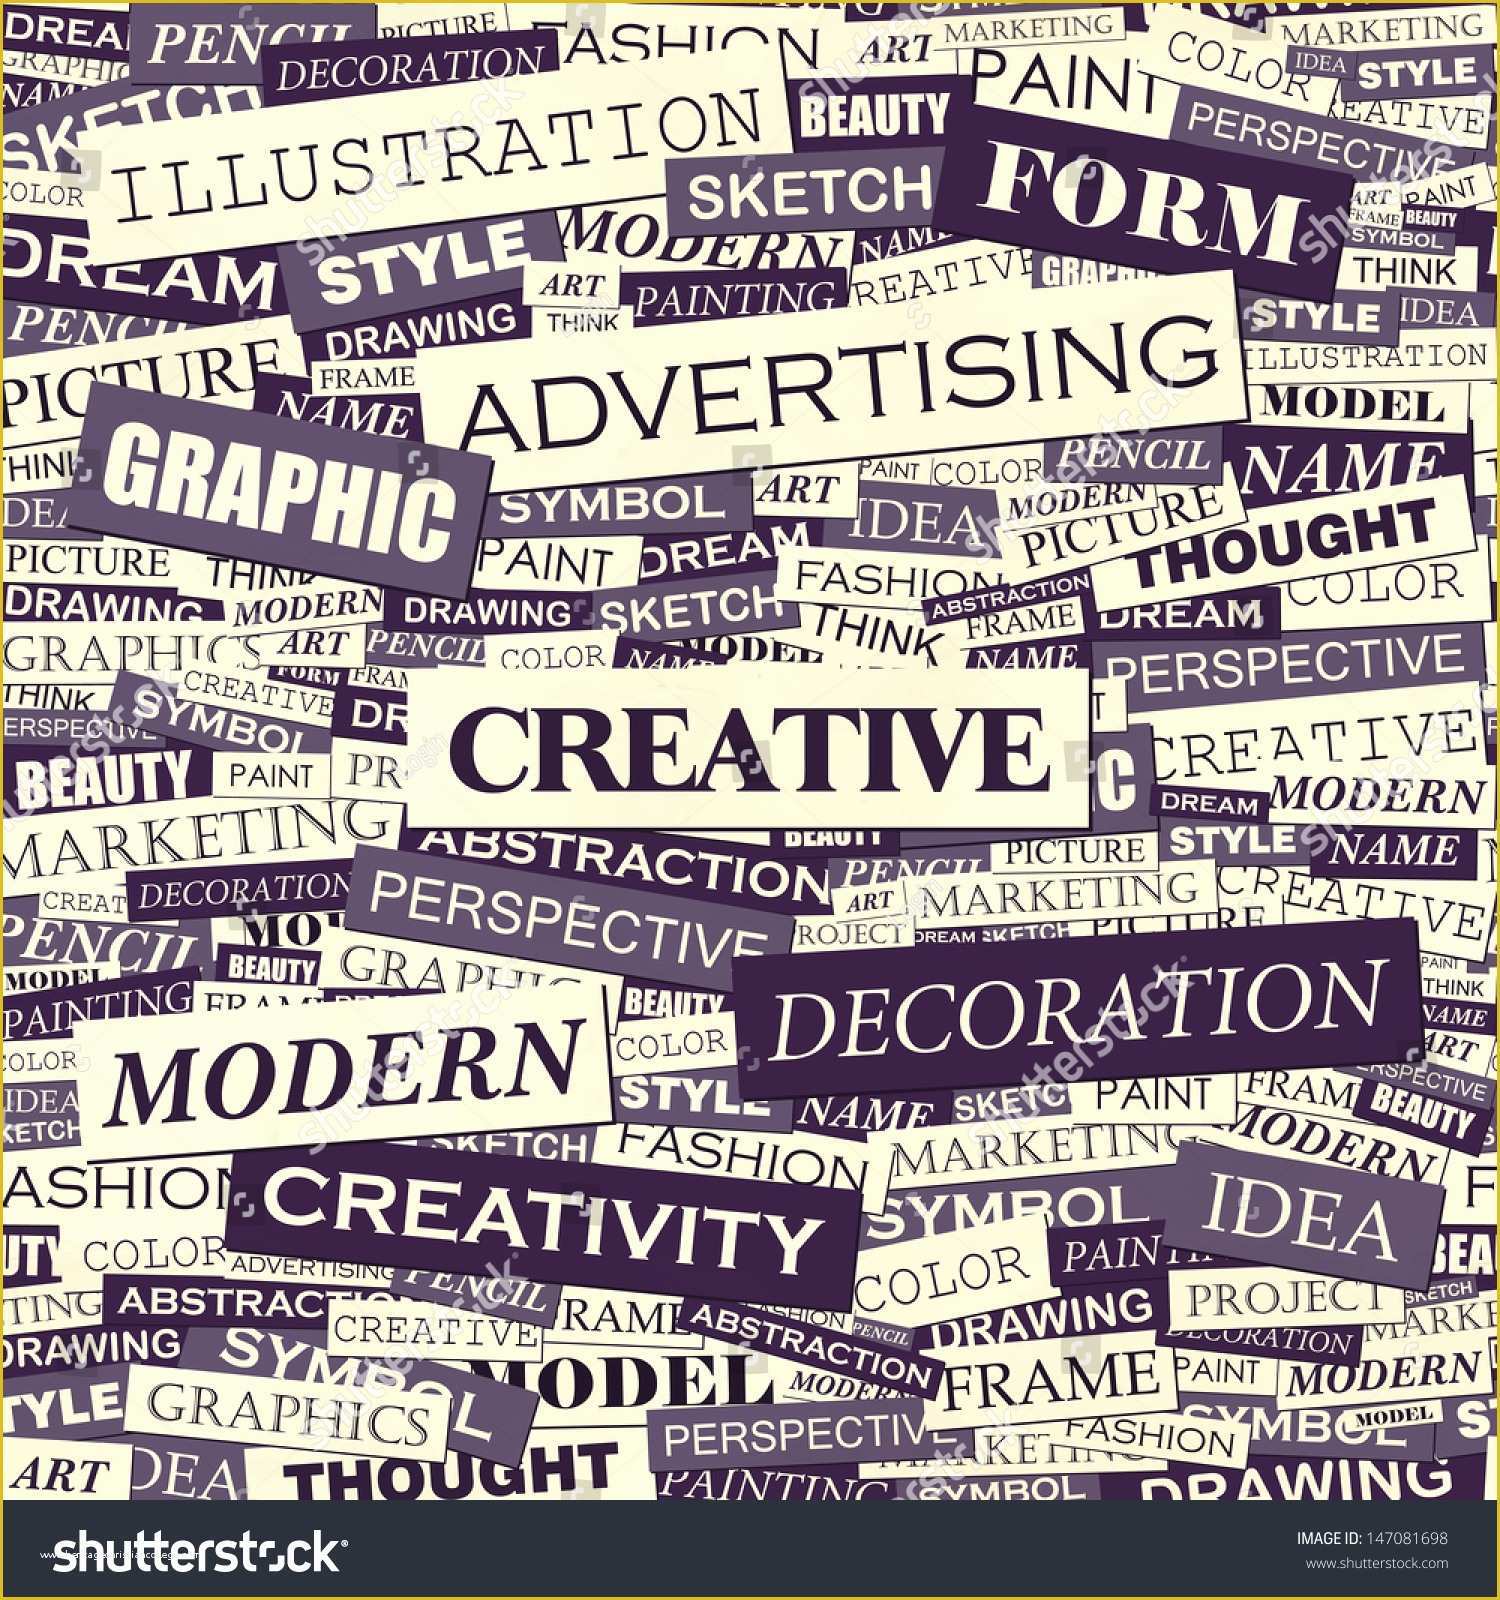 word-art-collage-template-free-of-creative-word-cloud-illustration-tag